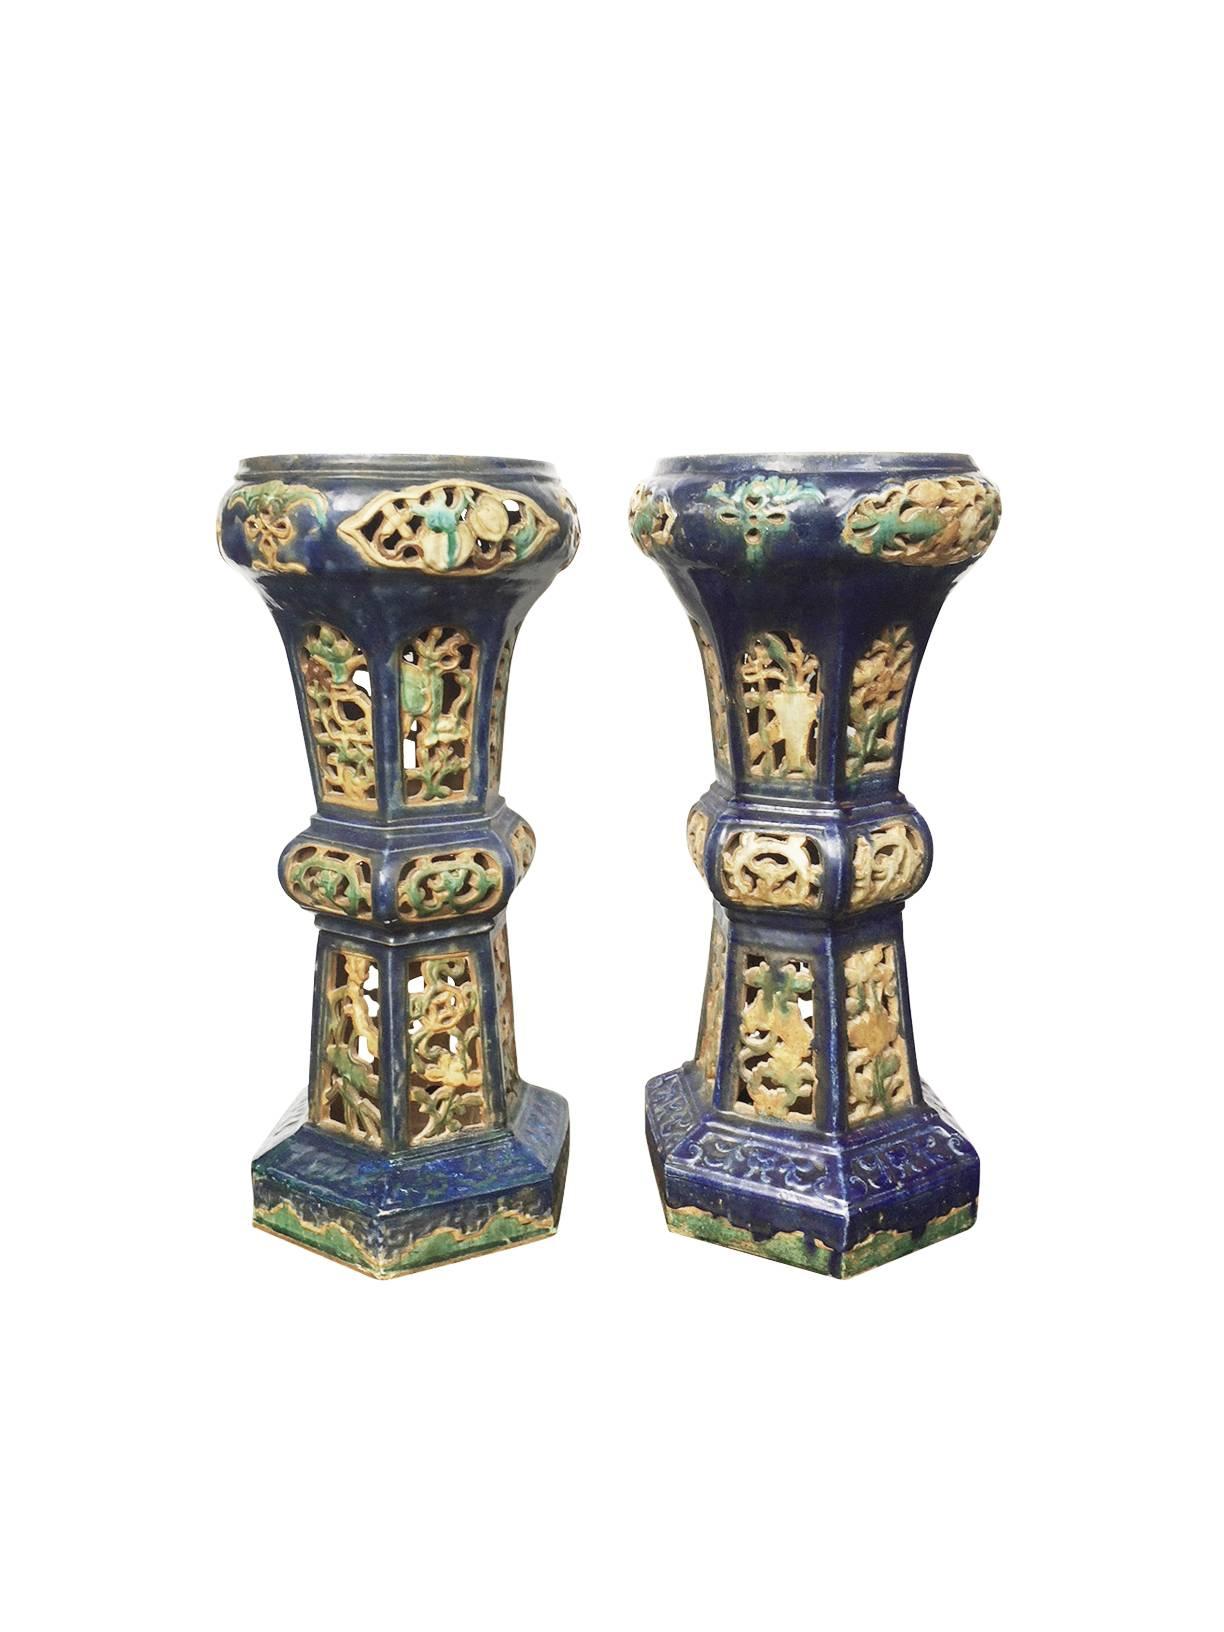 These two decorative ink-blue pedestals or end tables are antique and come from China. They are ceramic with a glaze that has slightly become matte and beautifully weathered over the years. Their design is floral with a trellis-like openwork